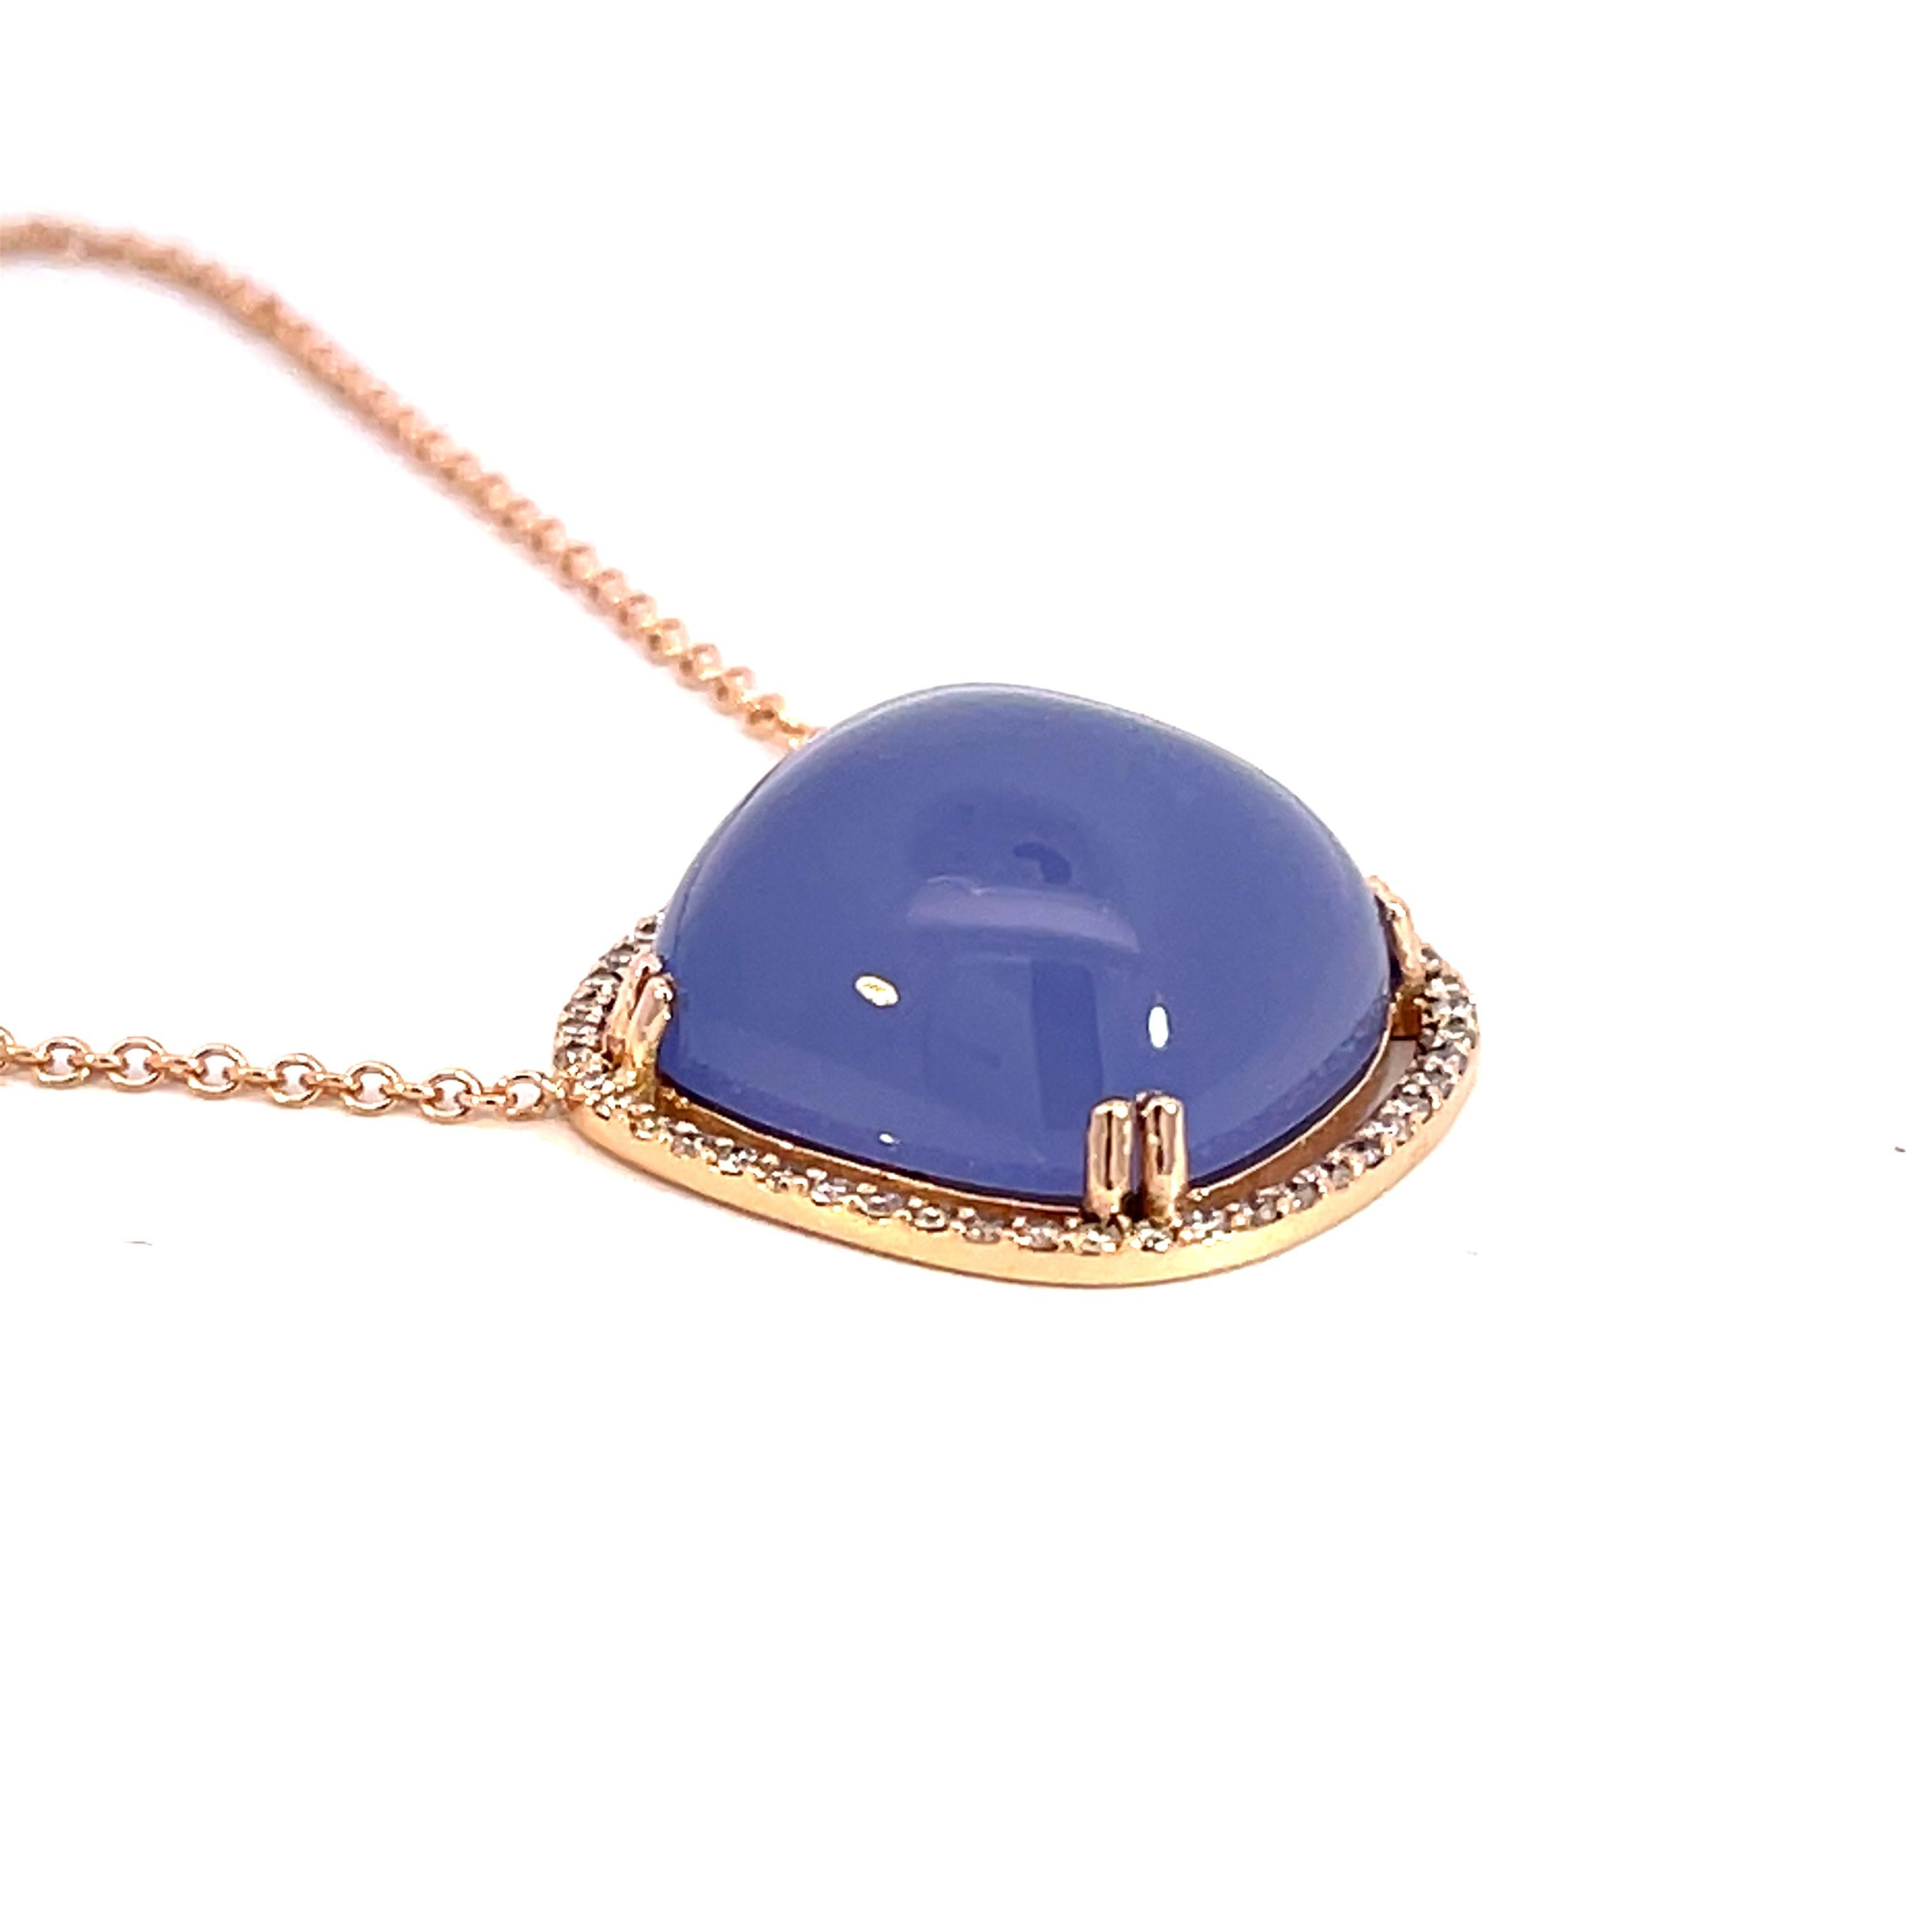 An 18k rose gold pendant featuring one double prong set cushion cut cabochon blue chalcedony 22.14 carats and accented by a halo of white F color VS clarity diamonds 0.30 total carat weight on a 1.5mm 14k rose gold cable chain. This necklace was